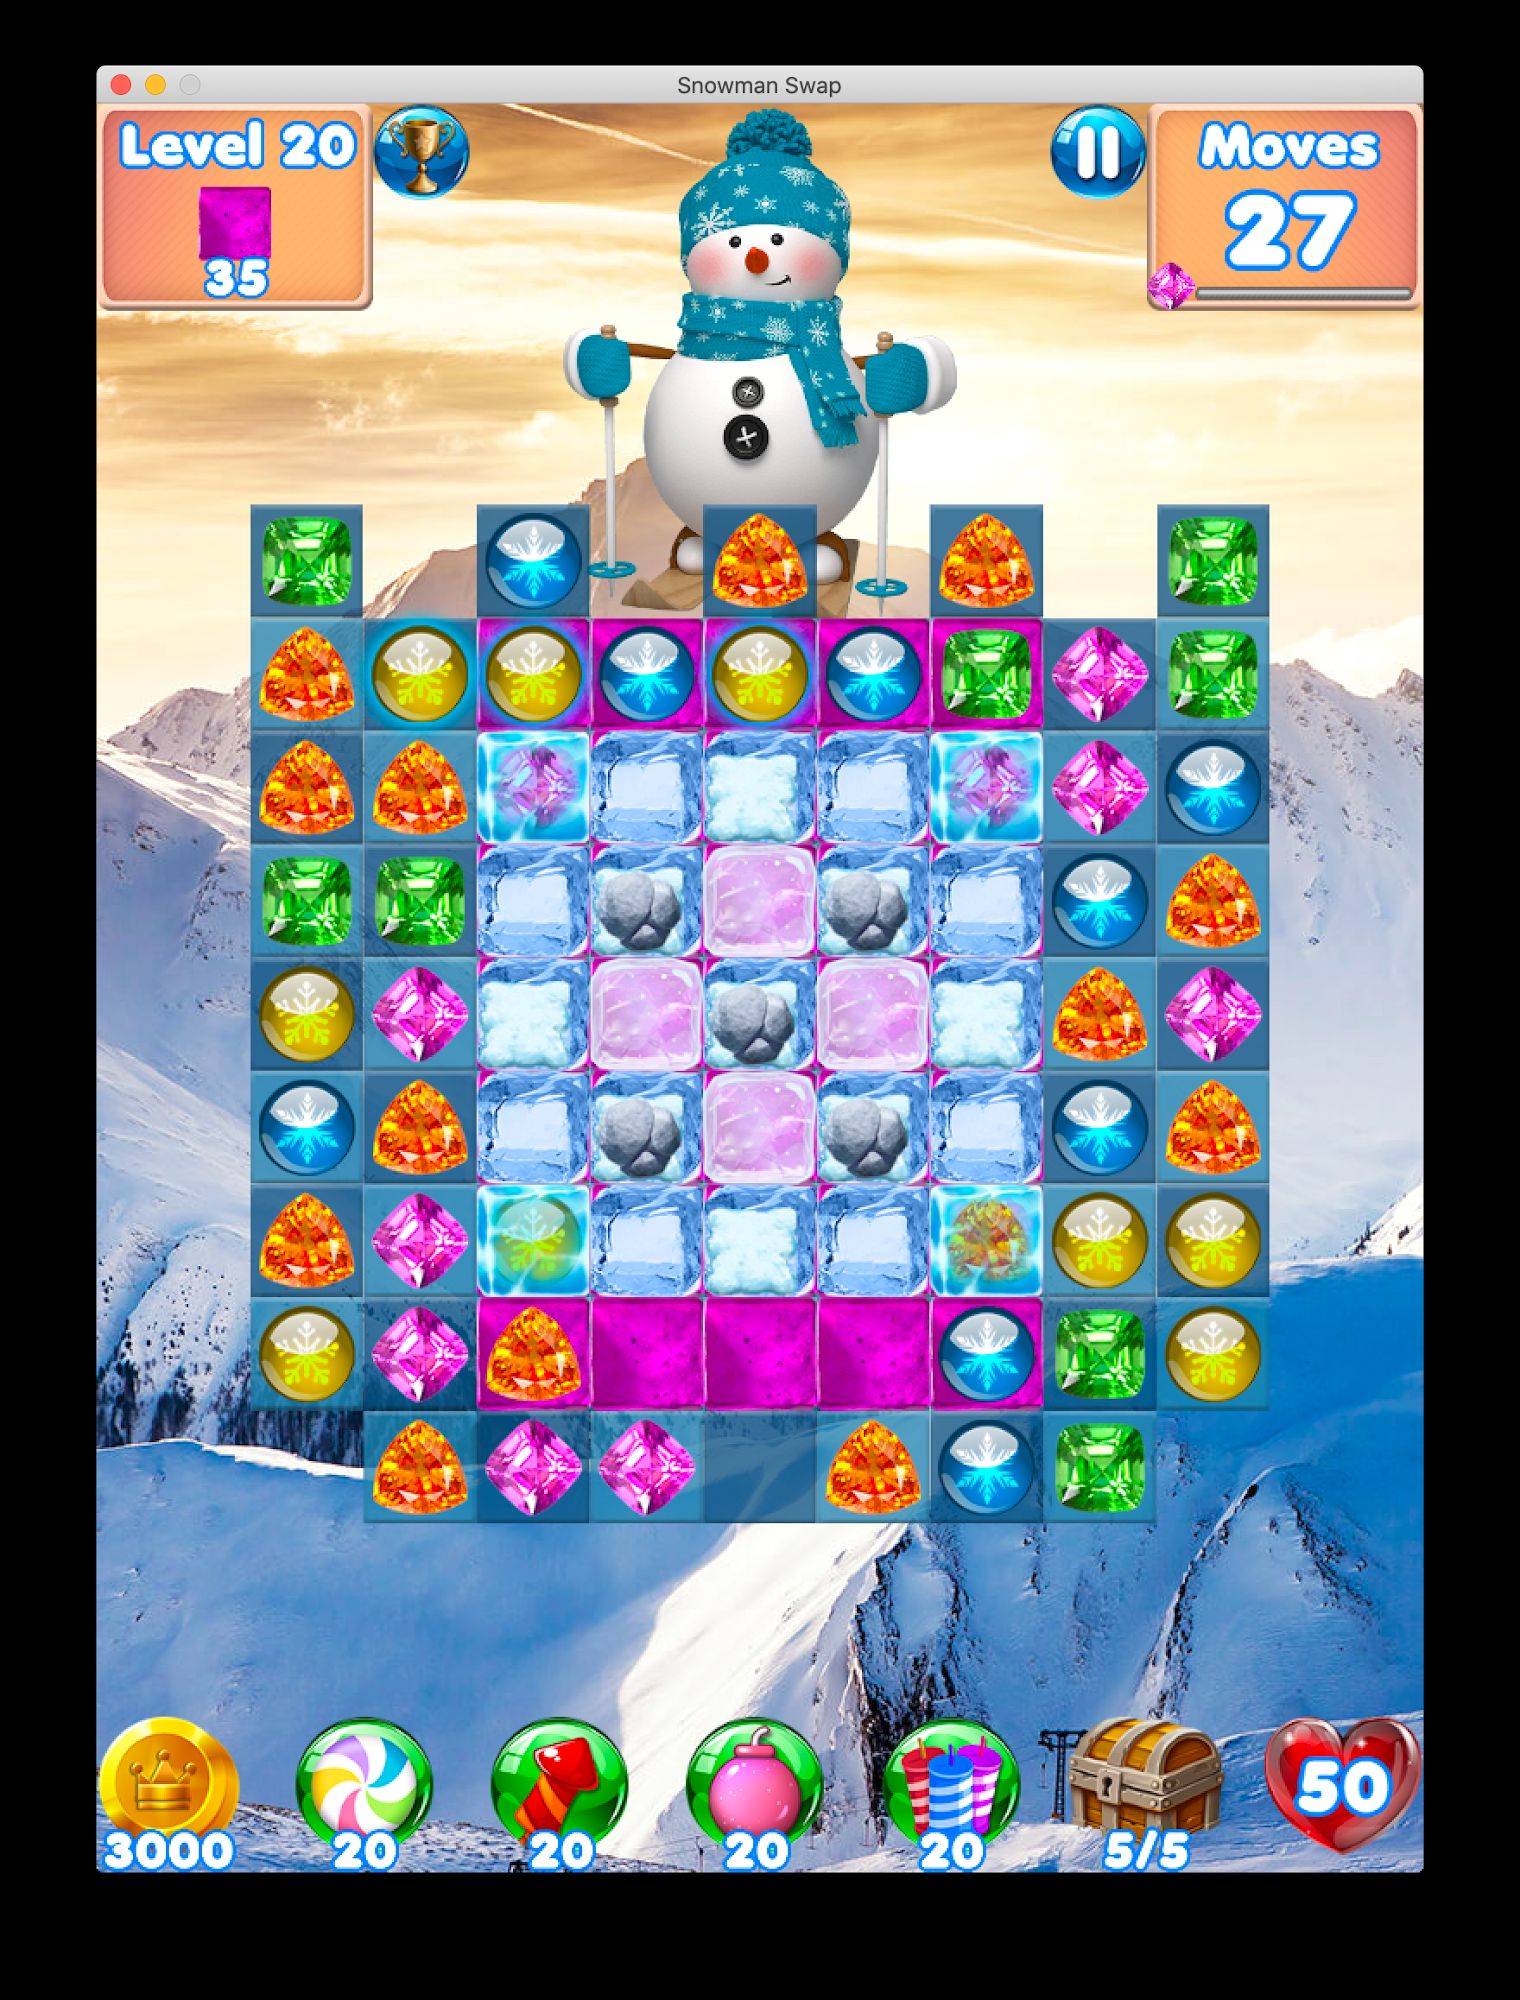 Full version of Android apk app Snowman Swap - match 3 games and Christmas Games for tablet and phone.